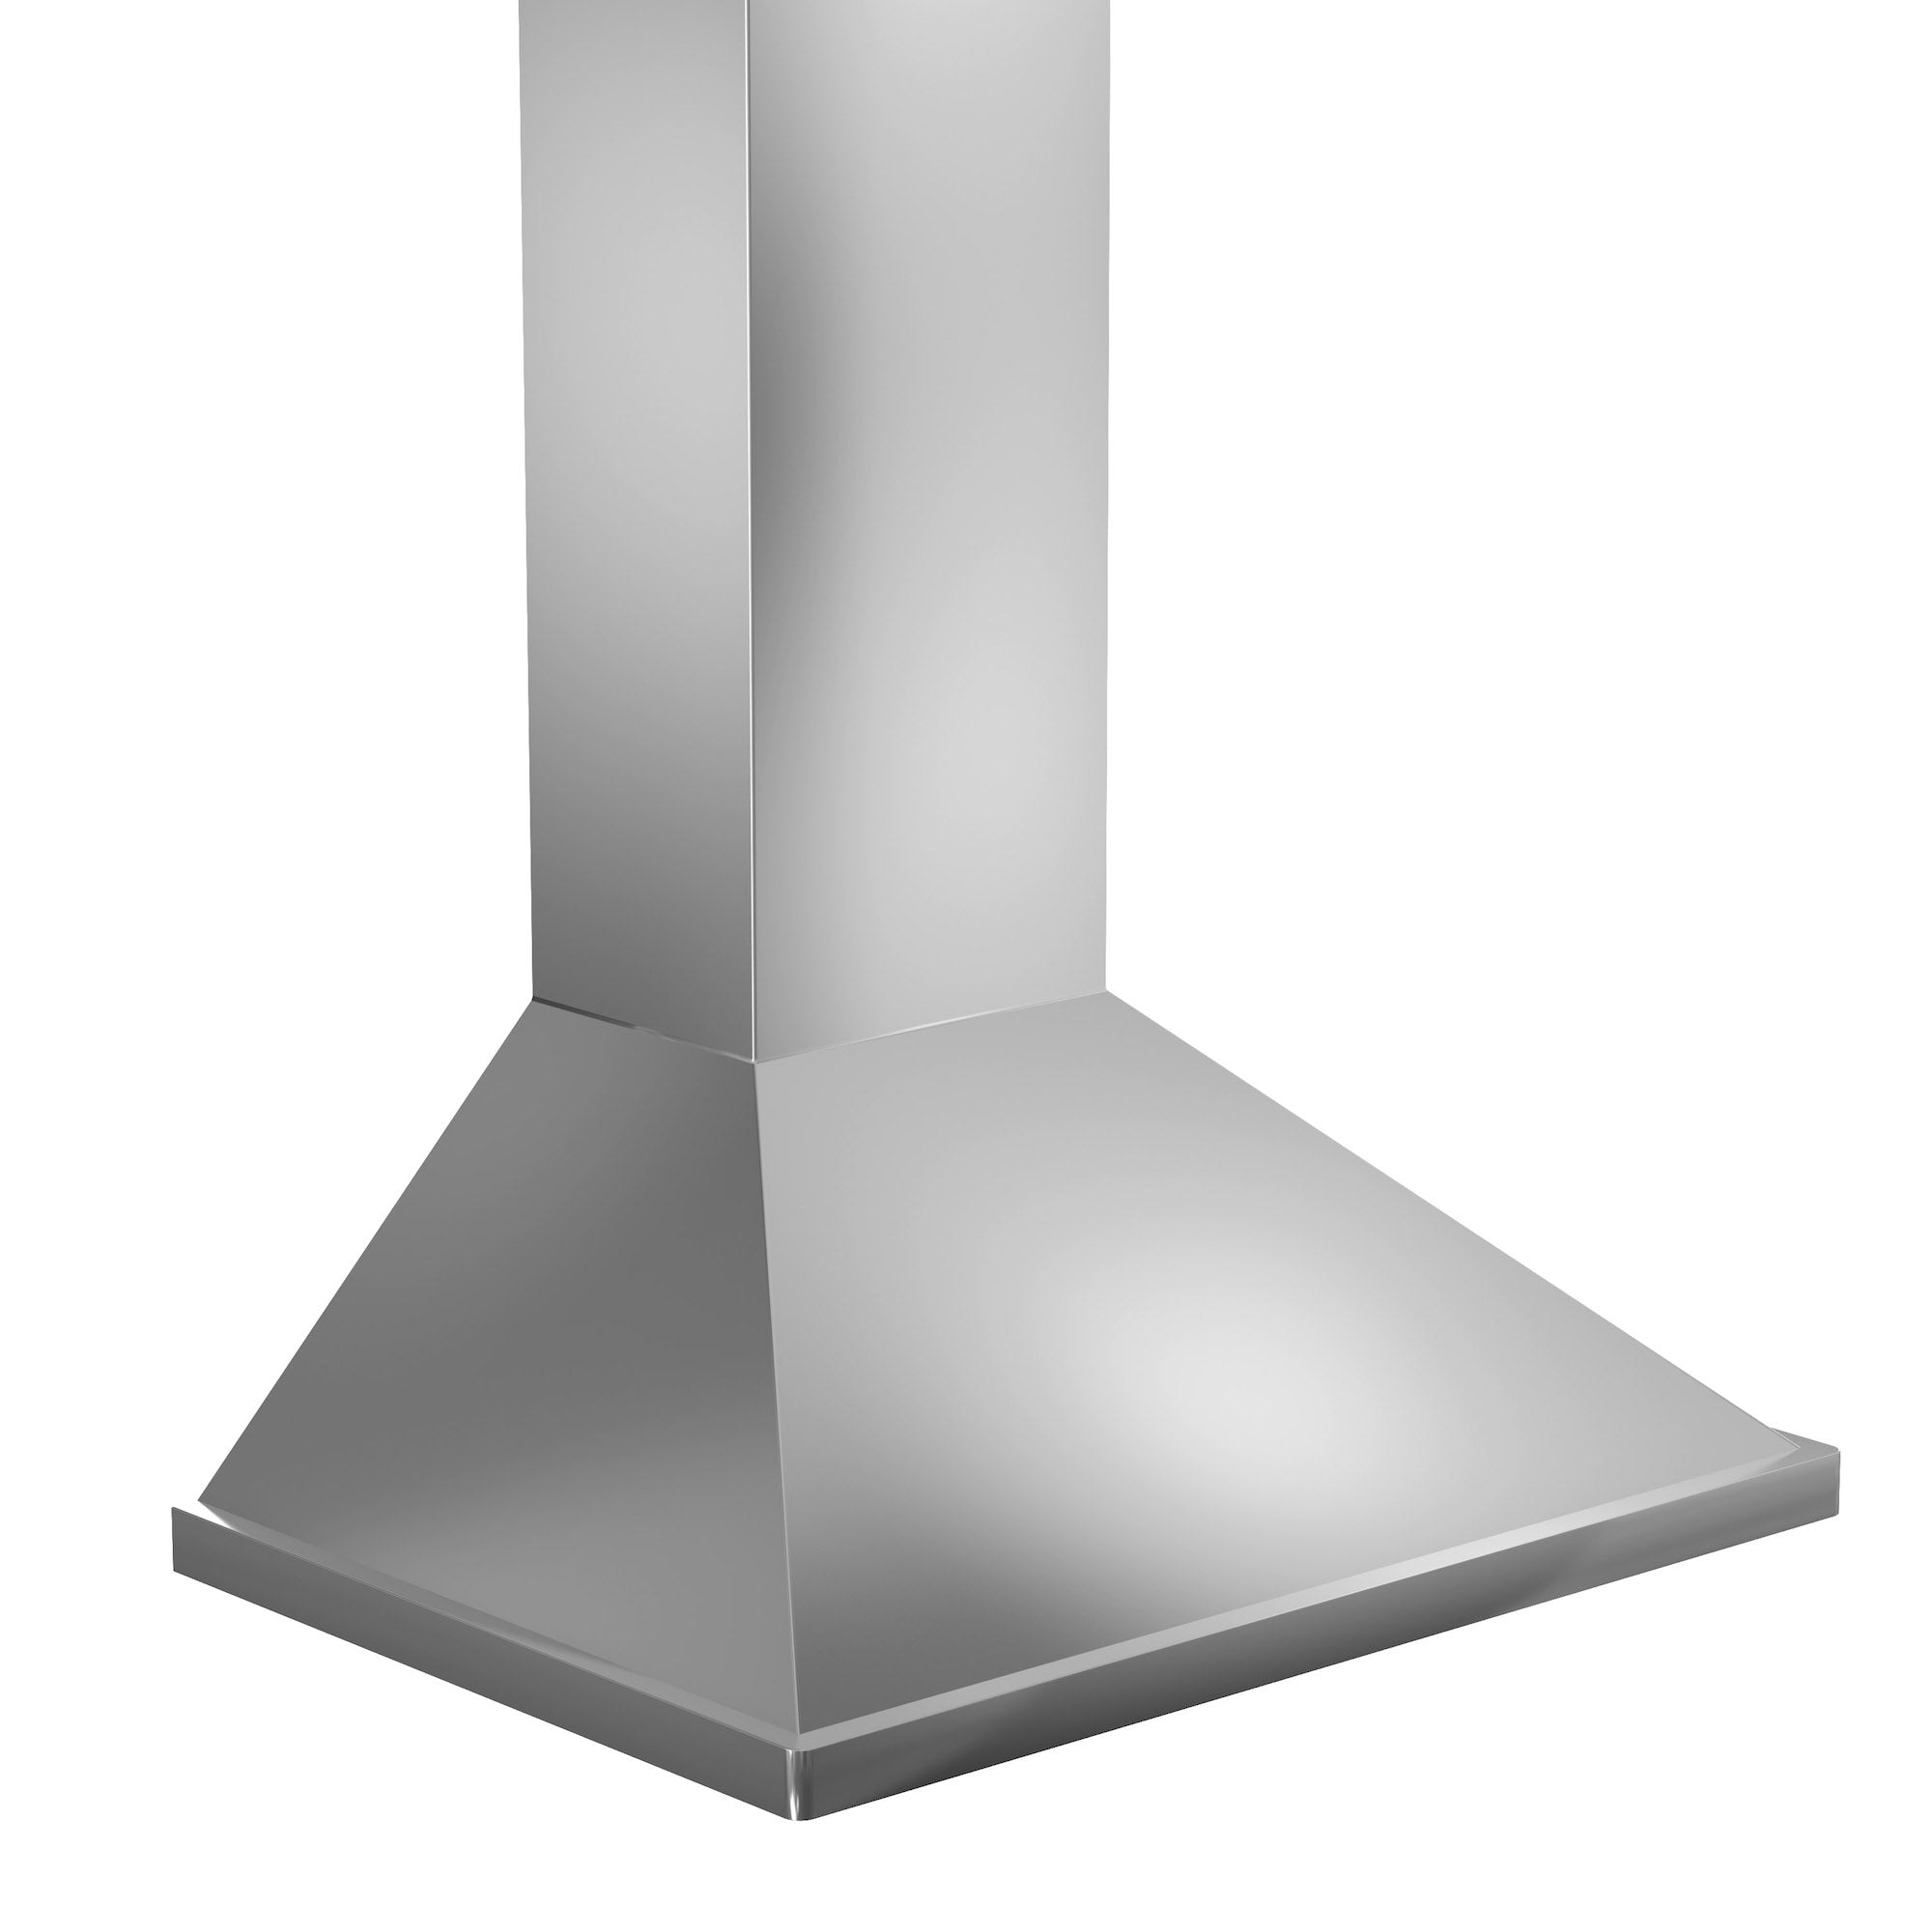 ZLINE 36" Convertible Vent Wall Mount Range Hood in Outdoor Approved Stainless Steel (696-304-36)